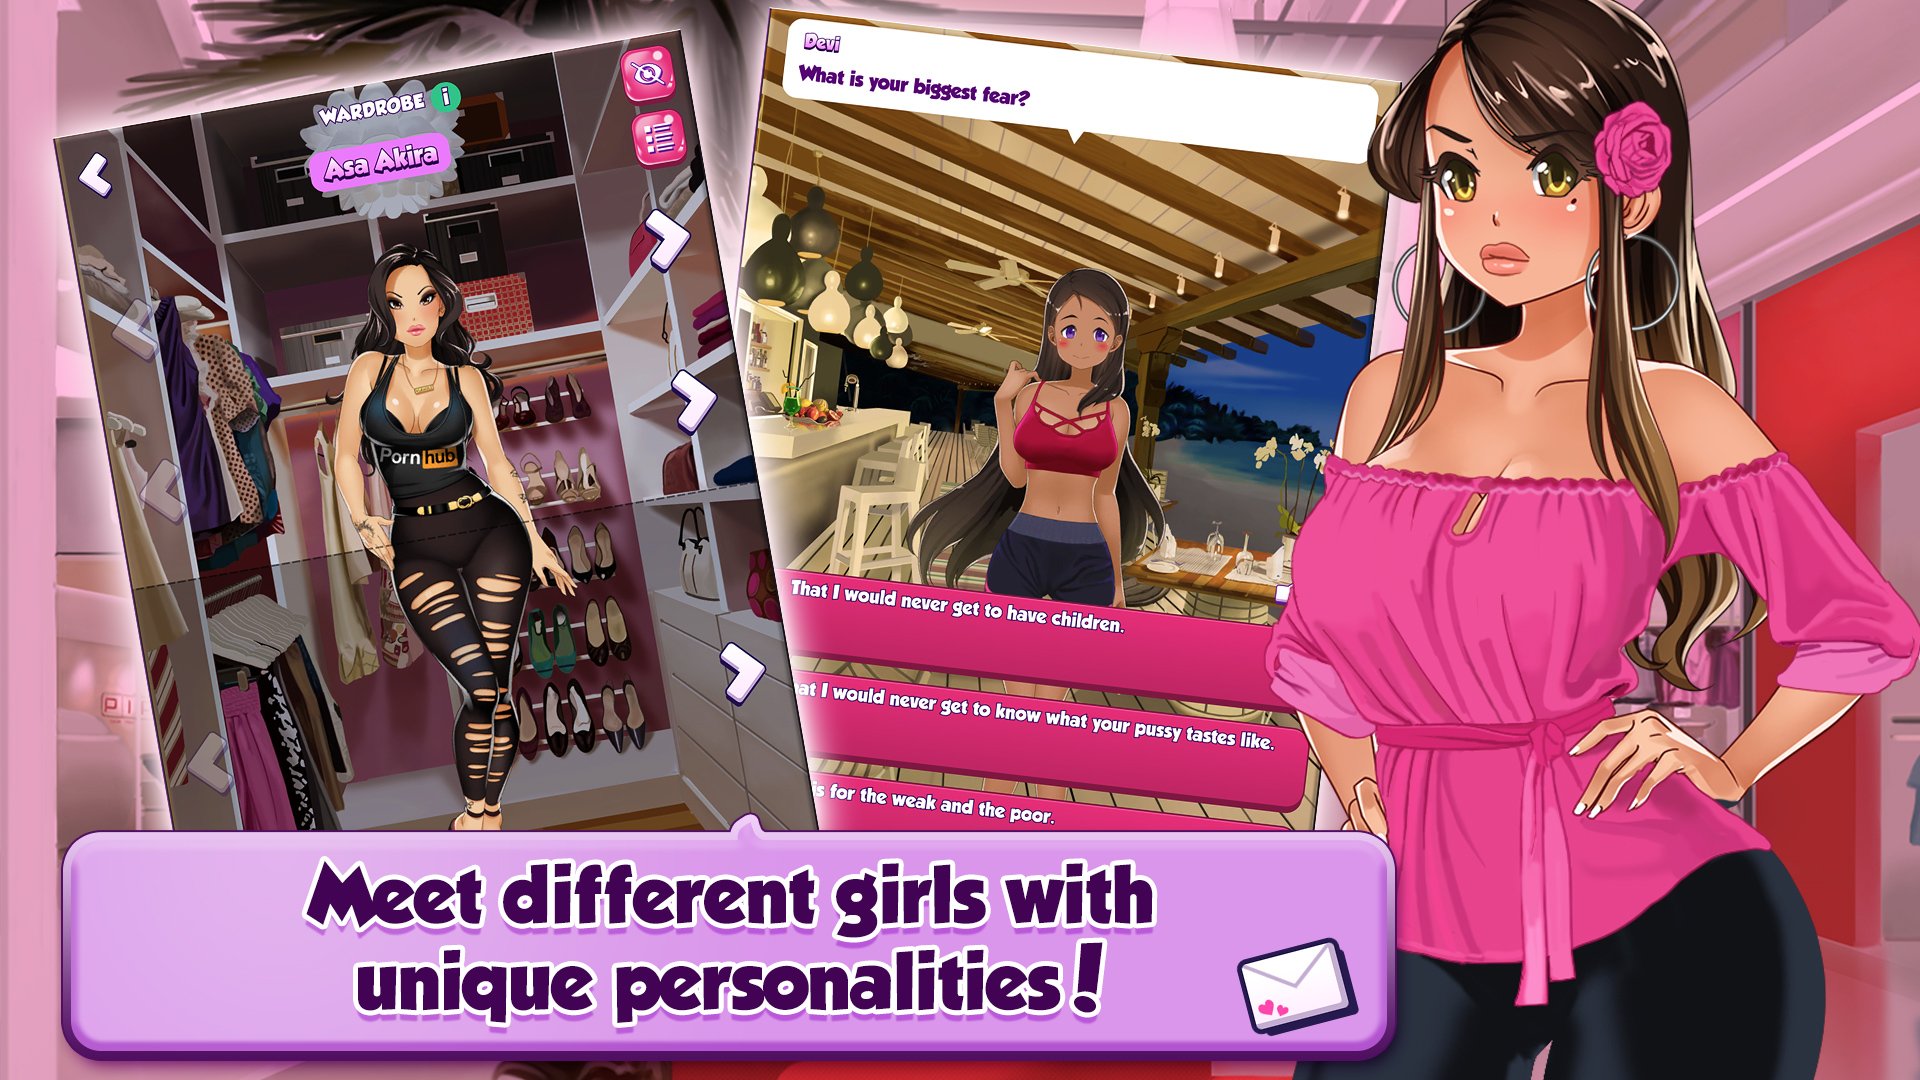 Play Booty Calls Dating Sim On Android - Android Porn Games-7784